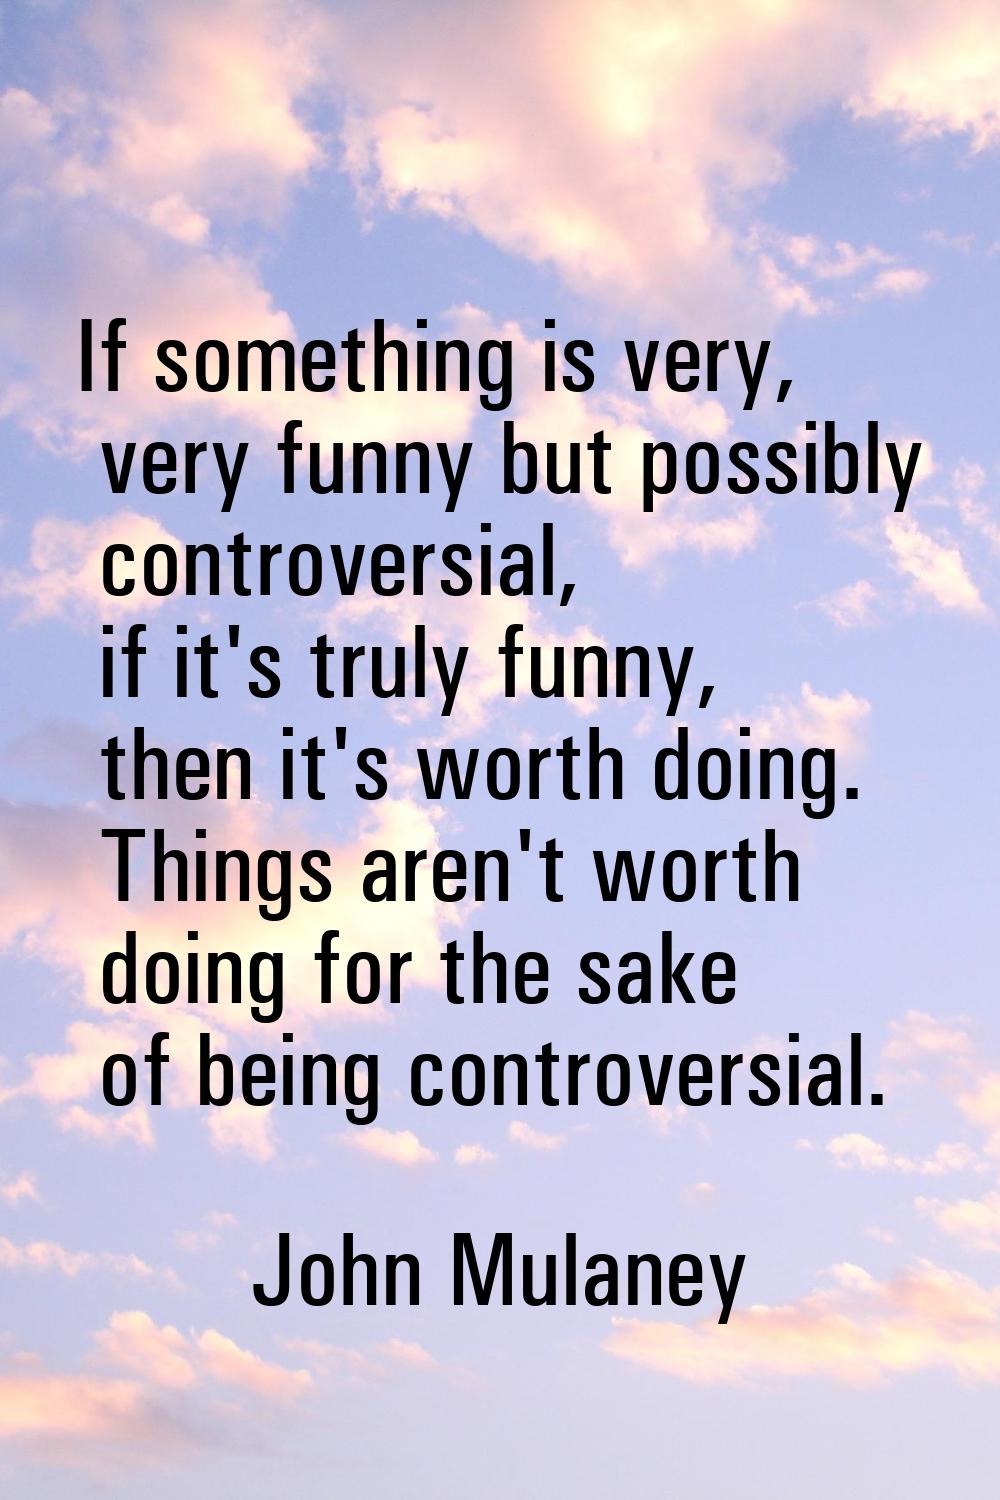 If something is very, very funny but possibly controversial, if it's truly funny, then it's worth d